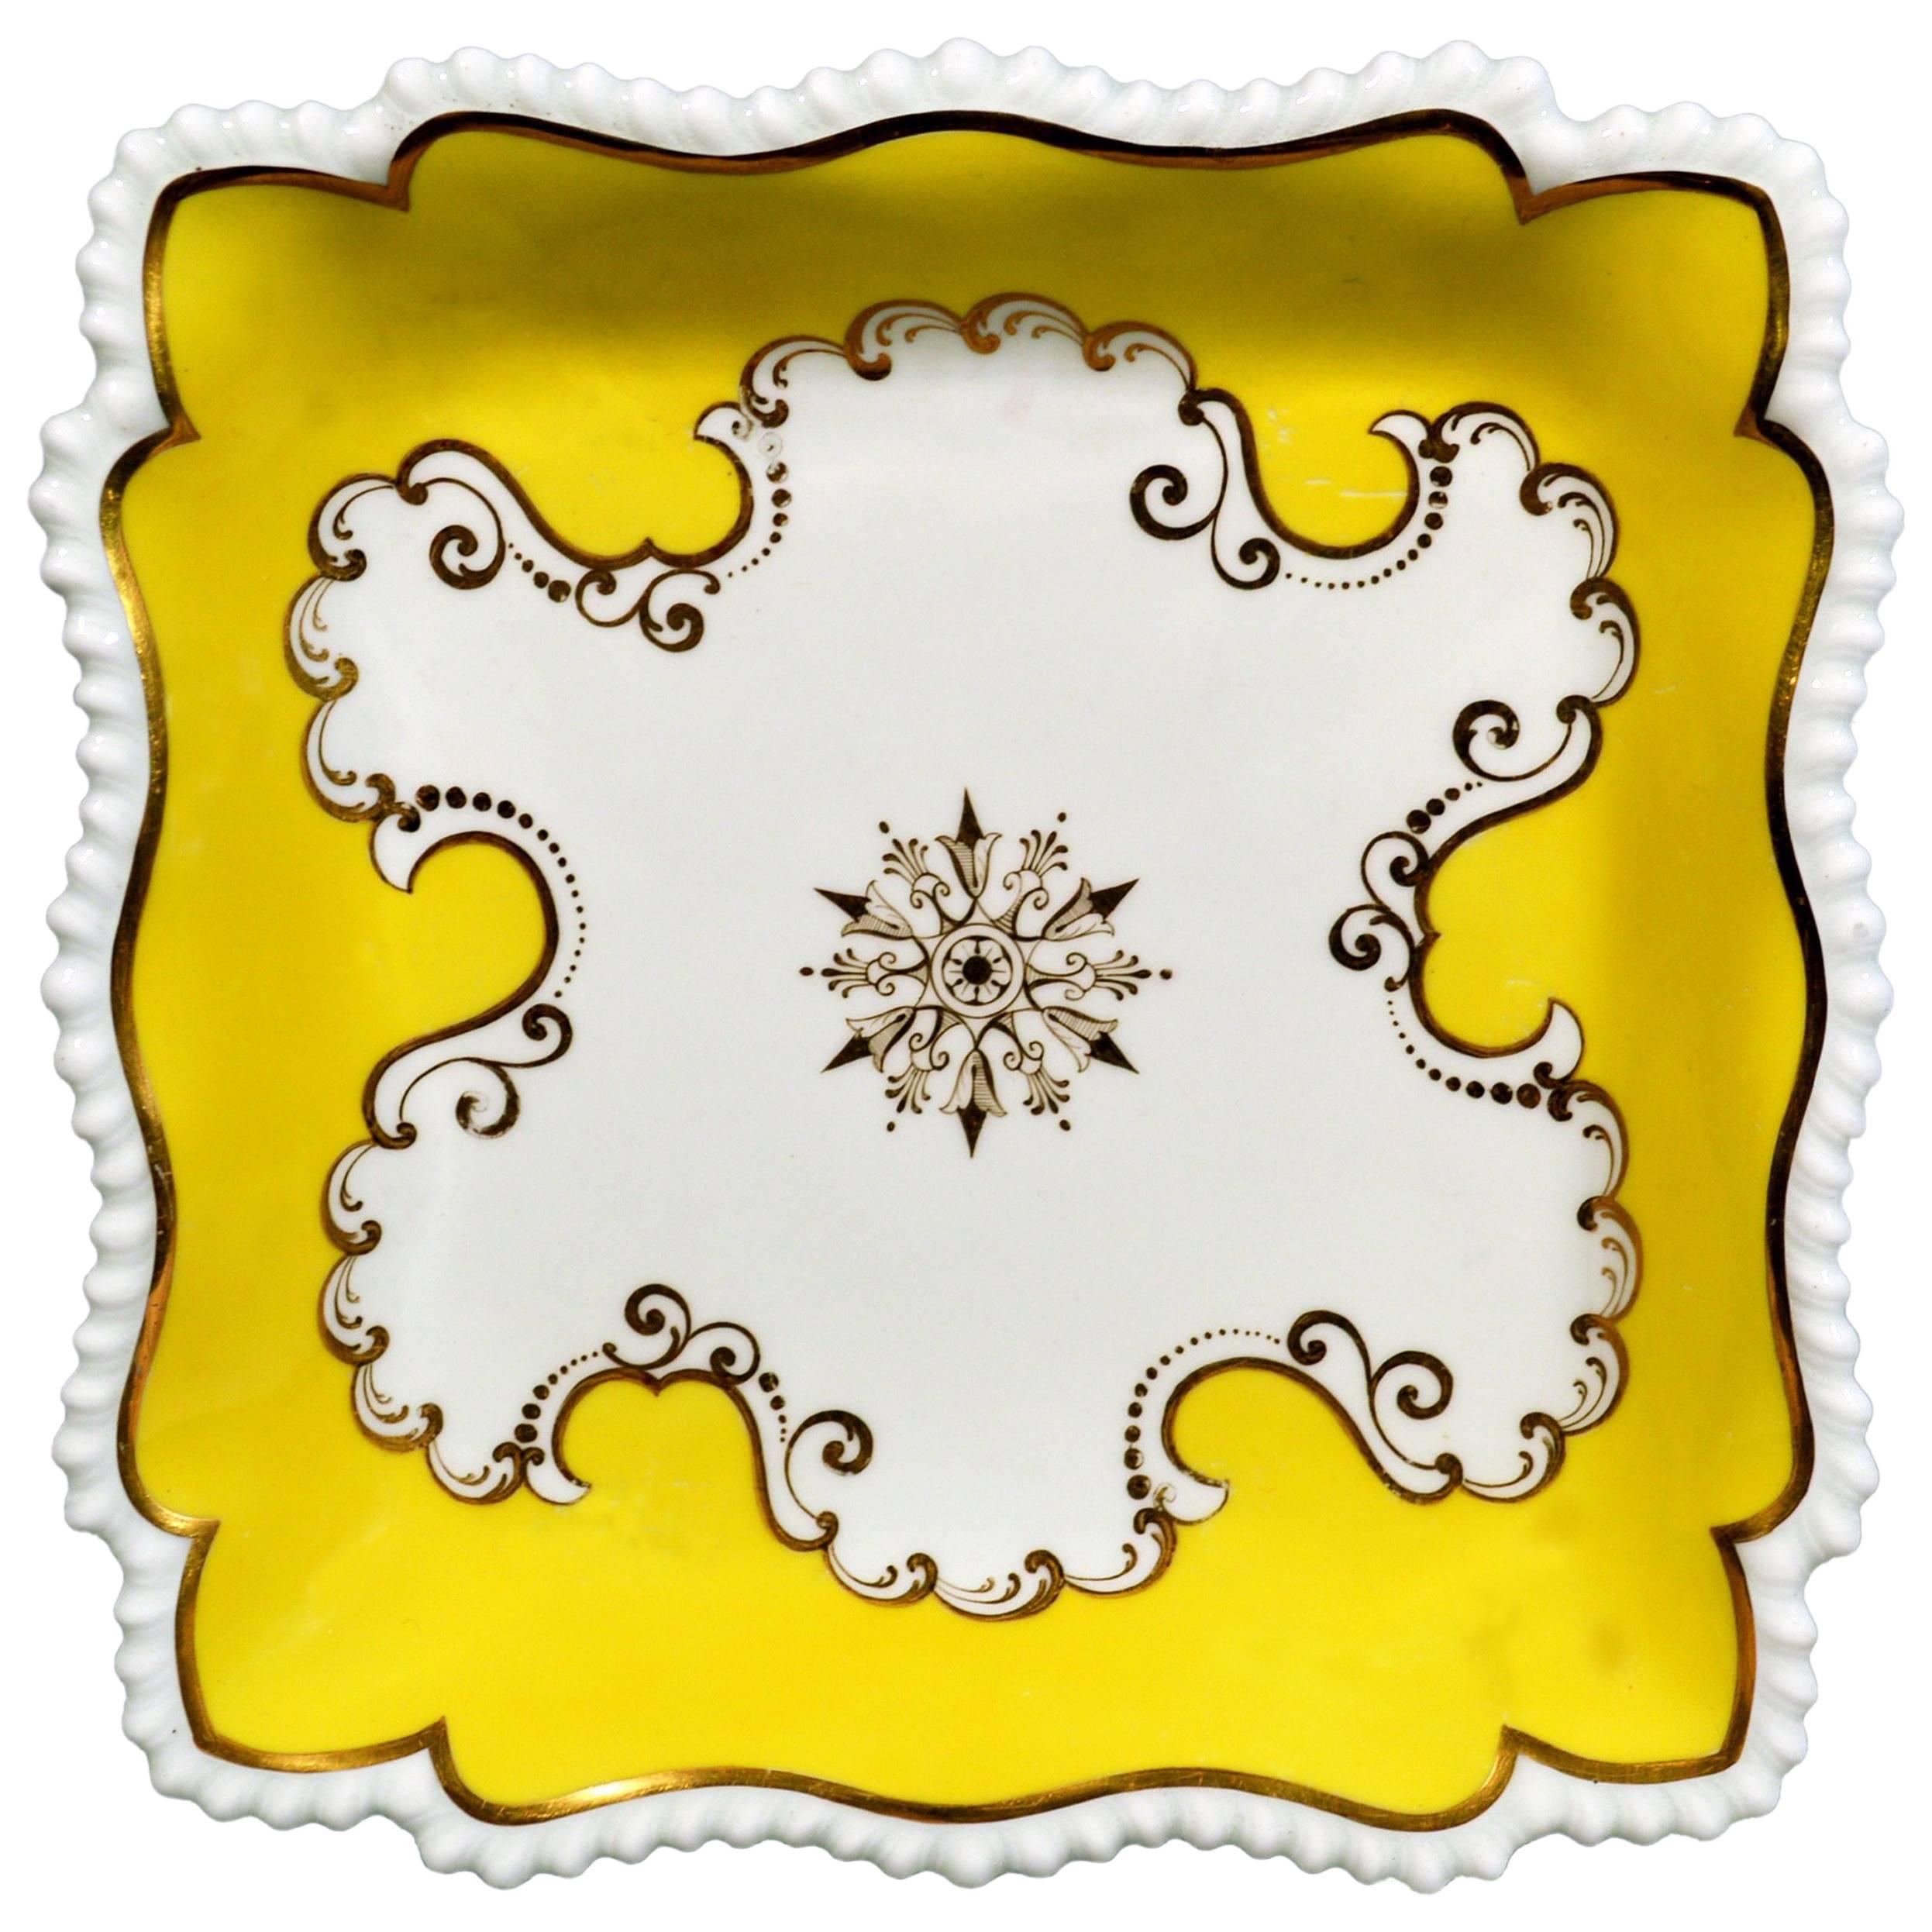 Flight, Barr & Barr Worcester Yellow Ground Square Porcelain Dishes, circa 1820